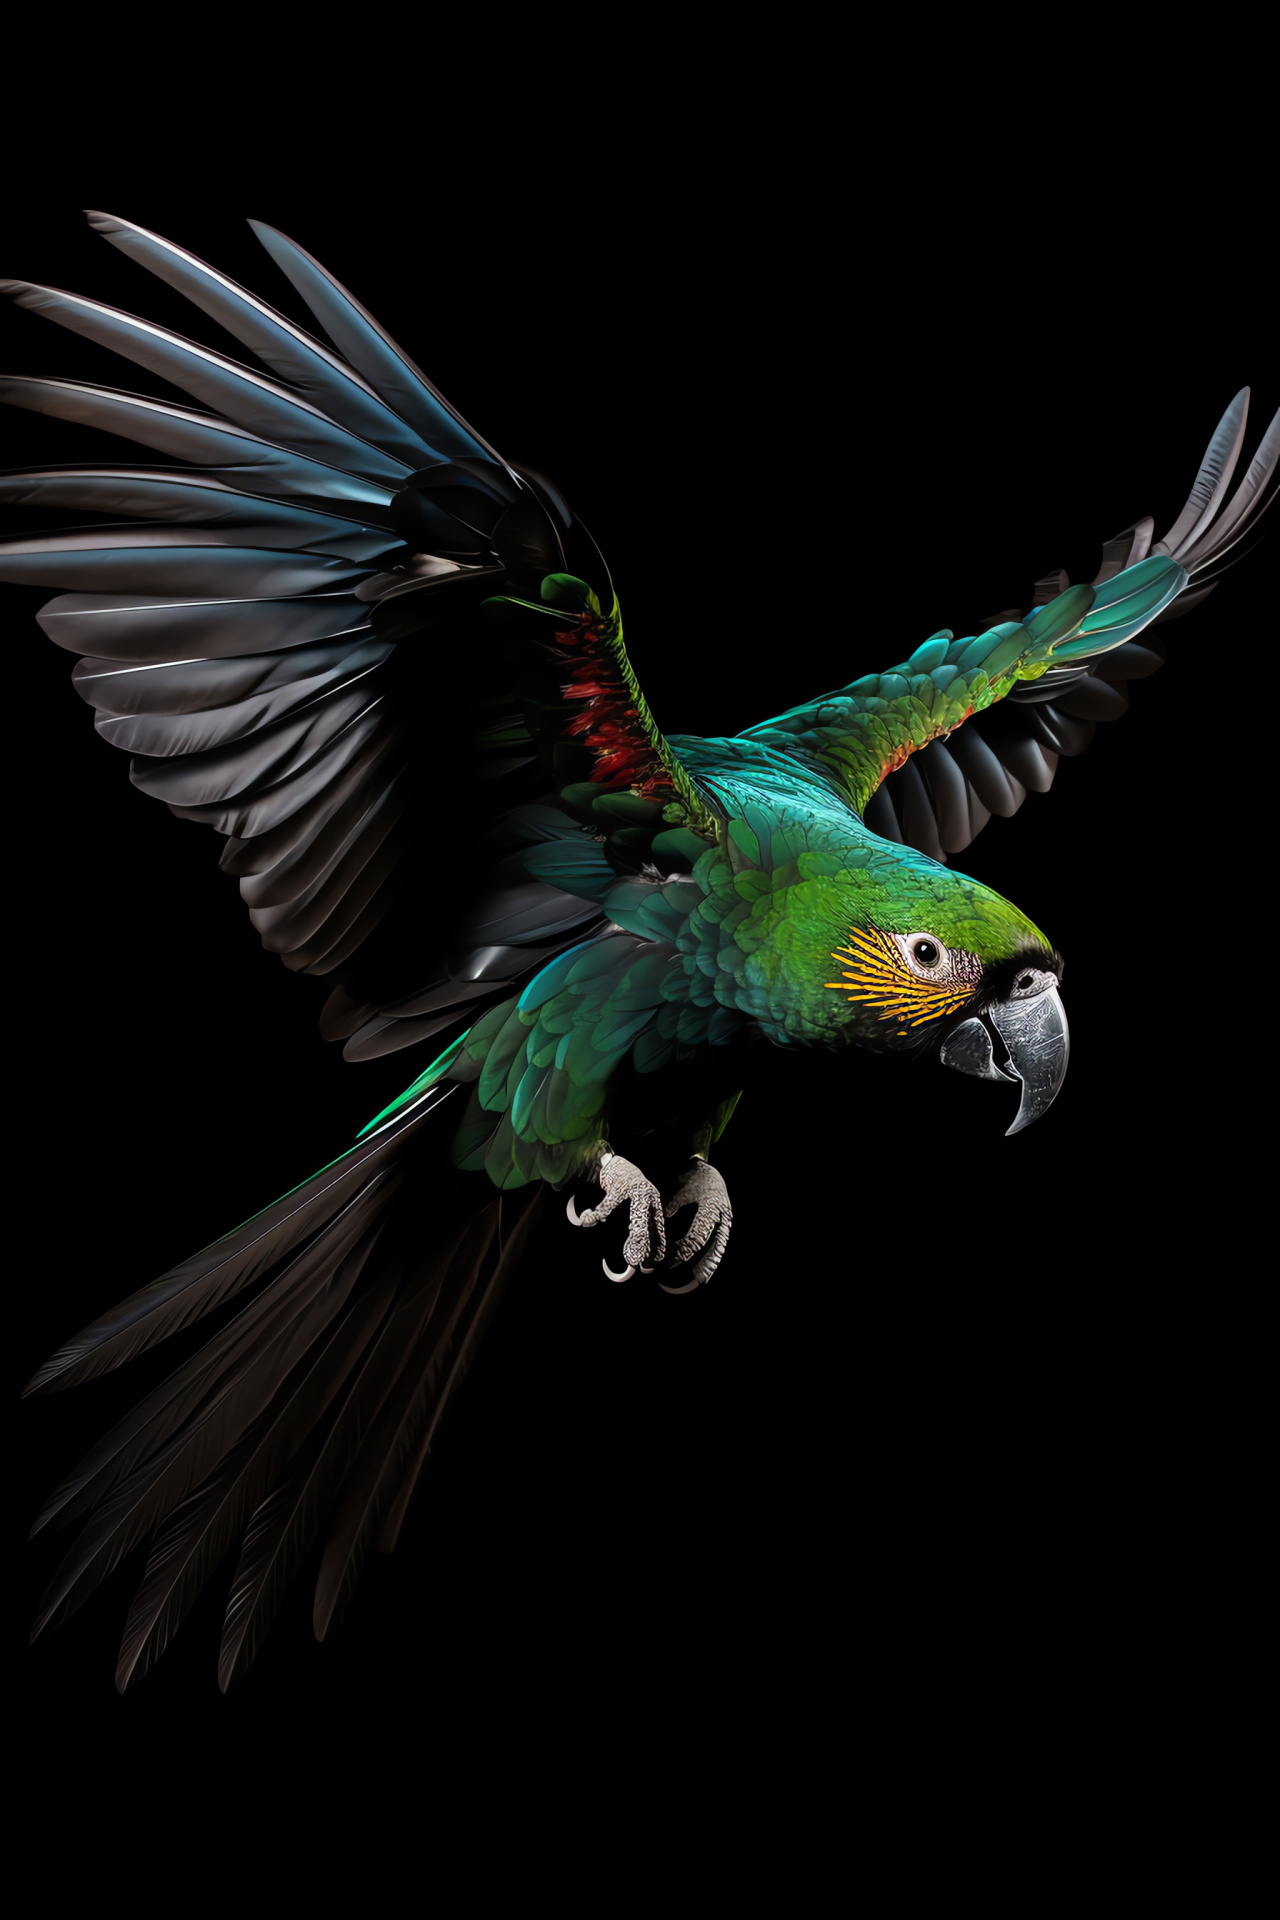 Parrot, flight motion, black background, freedom essence, feather details, HD Phone Wallpaper